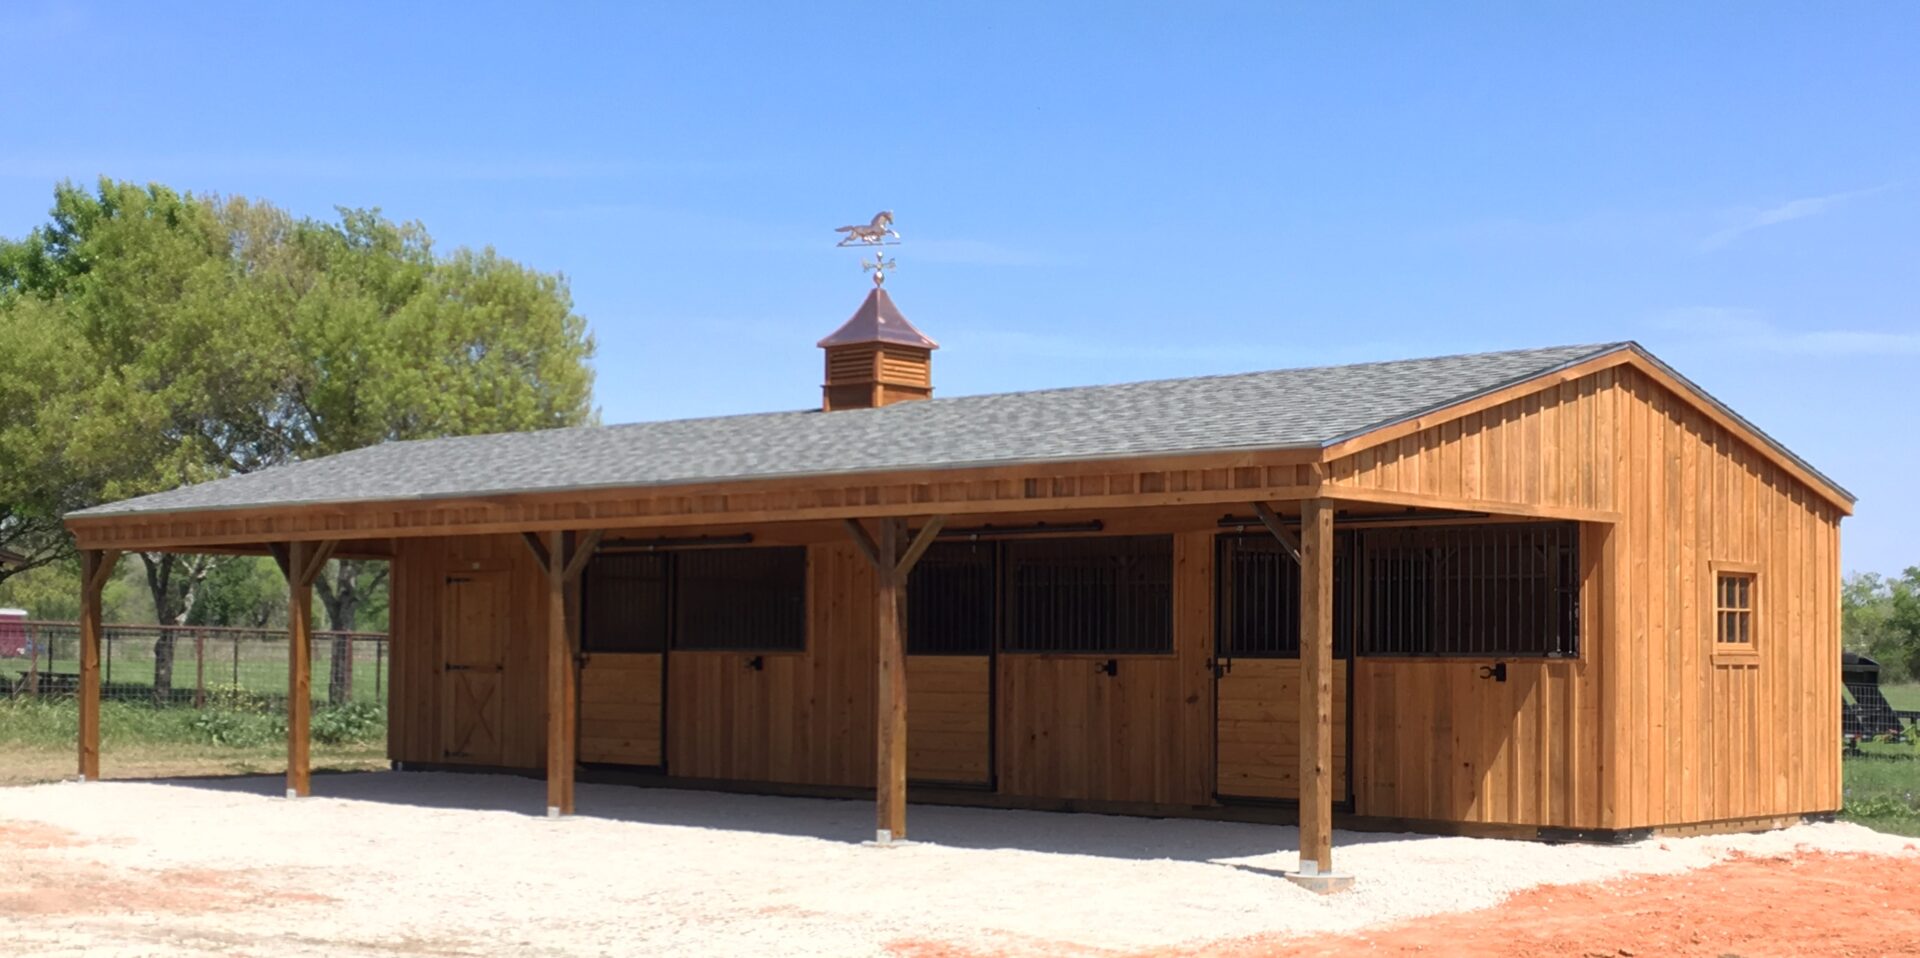 12' Wide Portable Shed Row Horse Barns for Sale | Deer Creek Structures